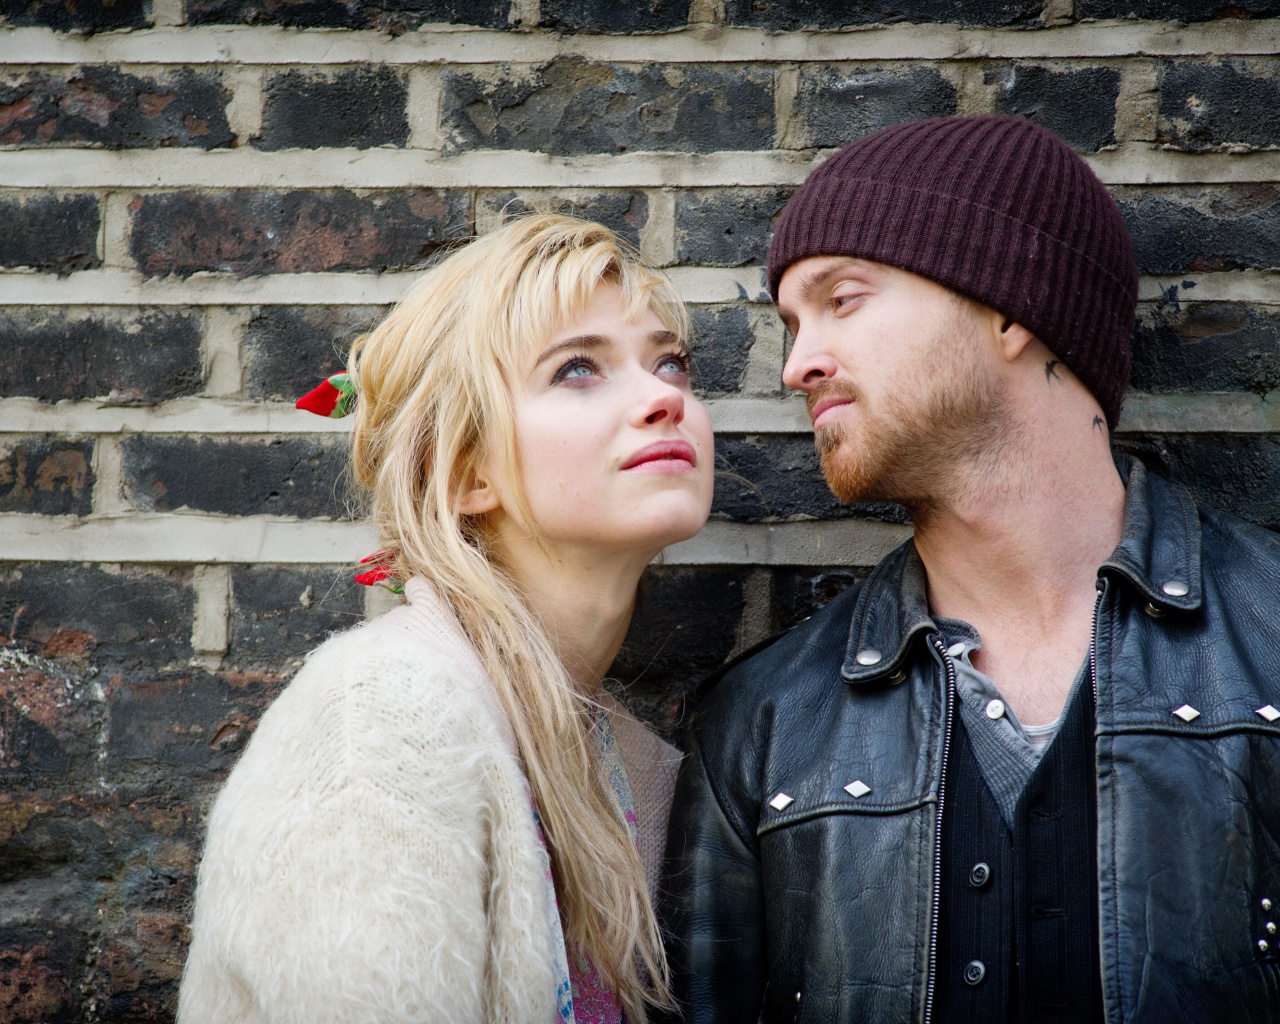 A Long Way Down with Aaron Paul and Imogen Poots screenshot #1 1280x1024